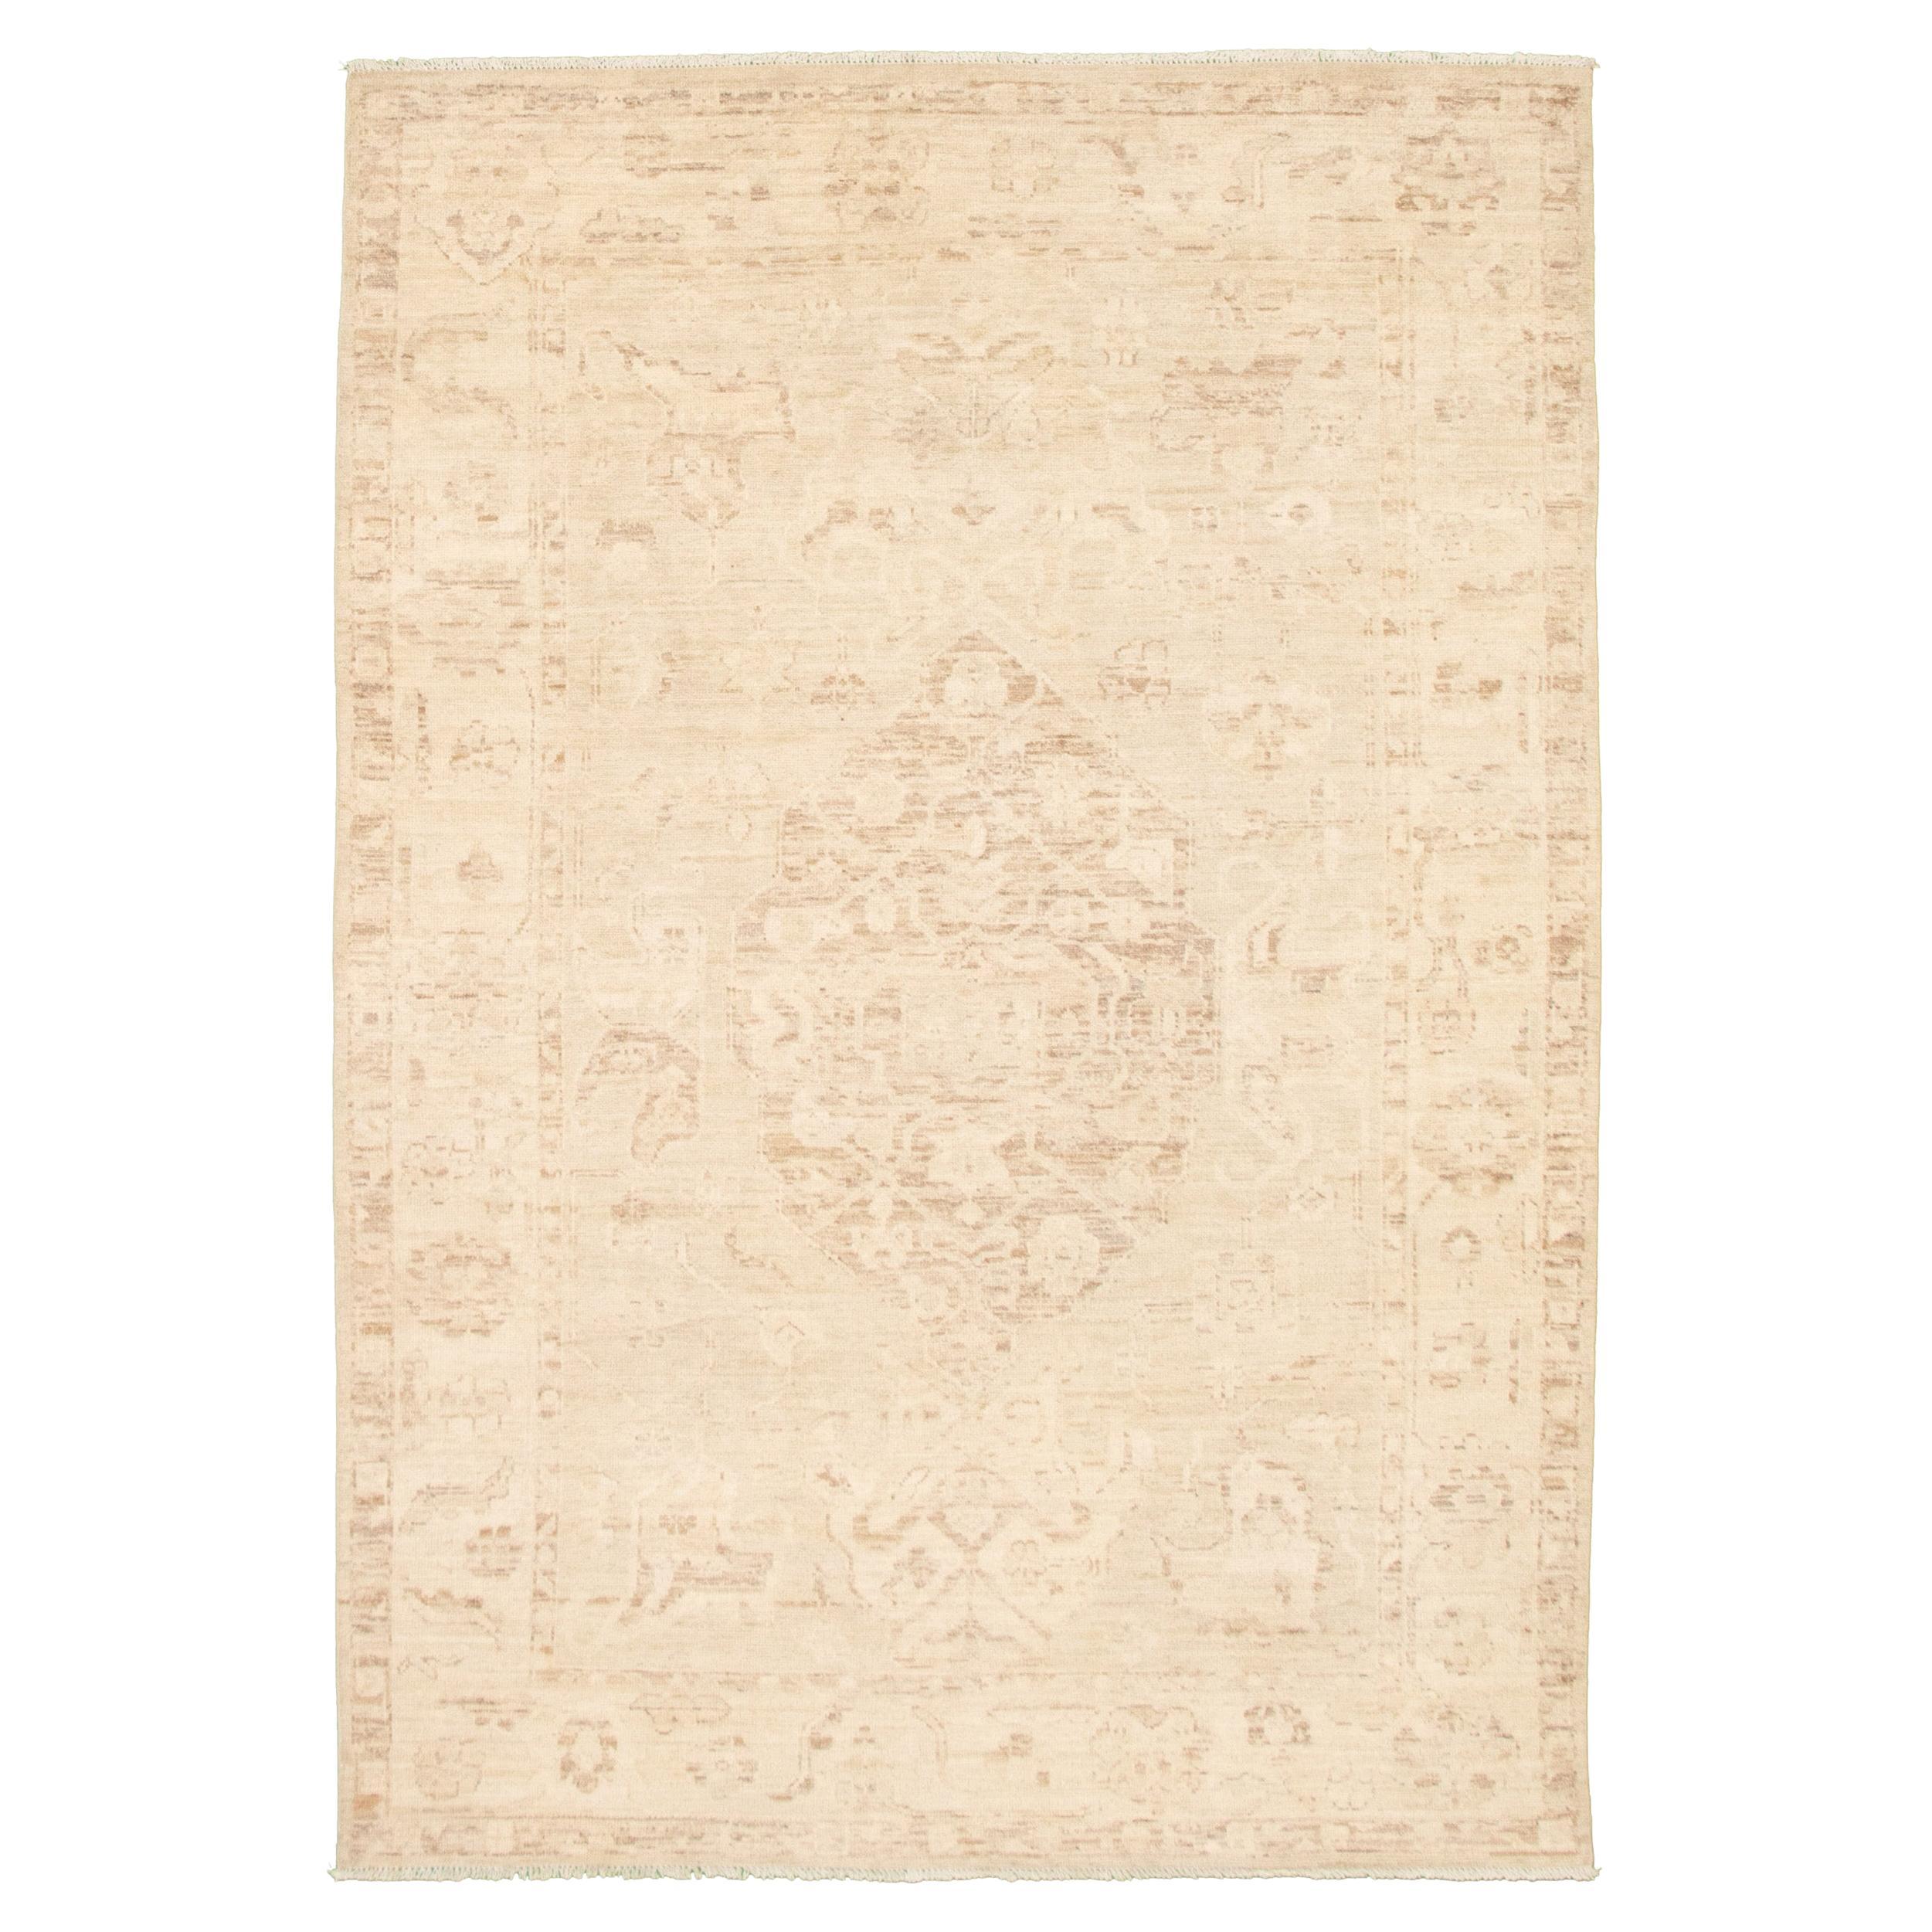 Formal and Subdued Transitional Wool Persian Oushak Carpet, 6' x 9' For Sale